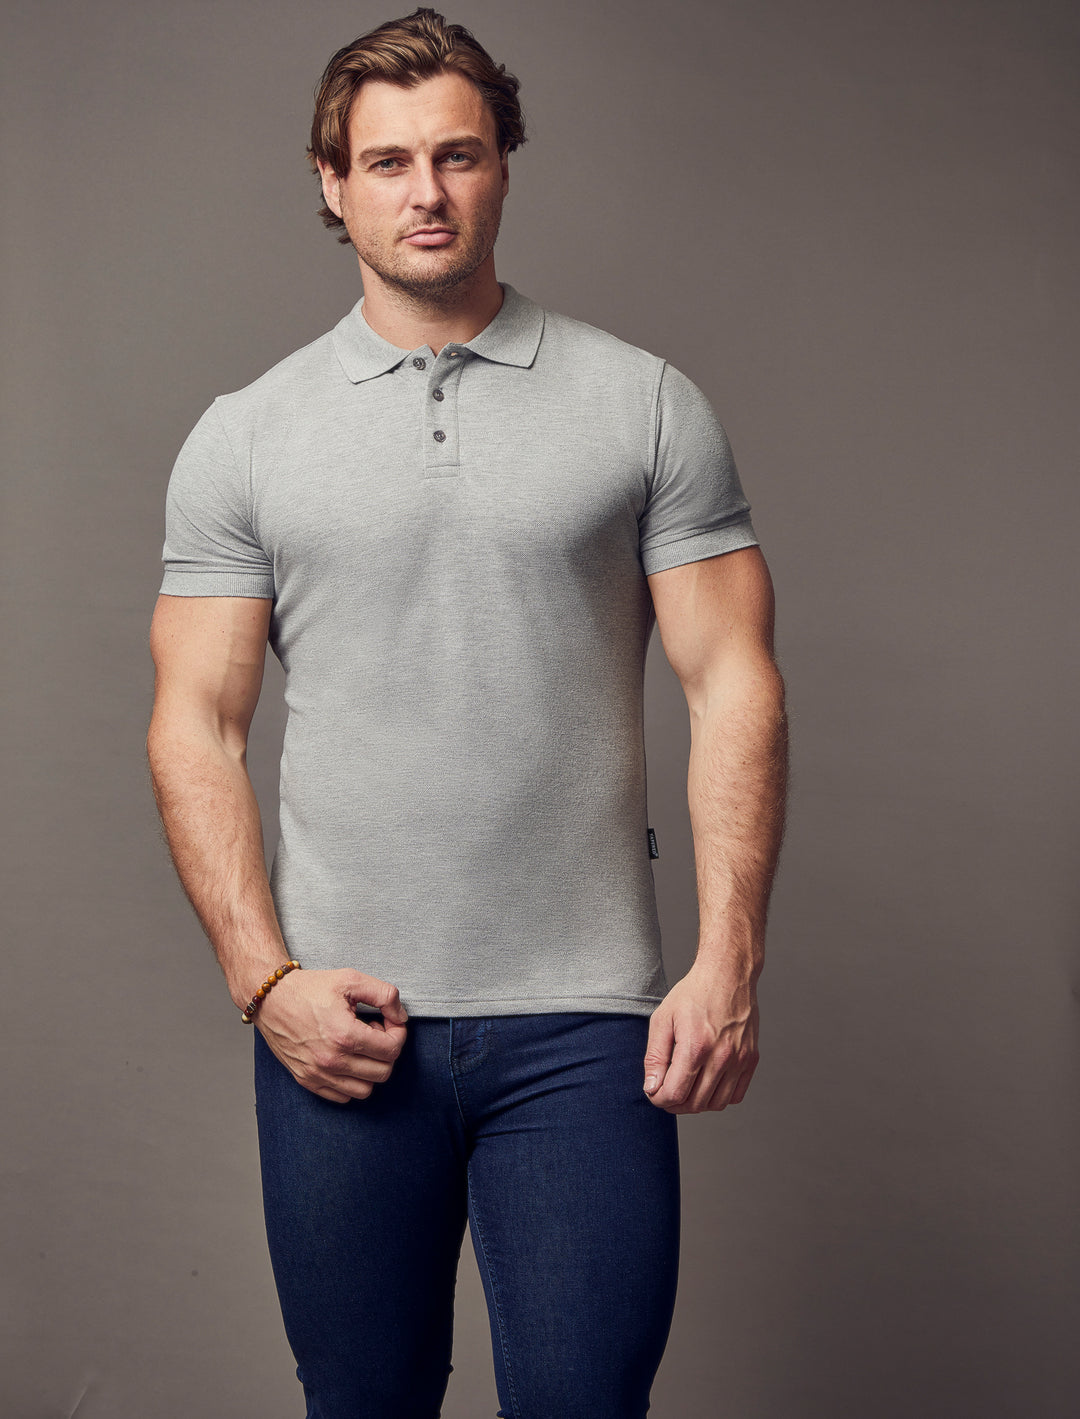 grey muscle fit short sleeve polo shirt, highlighting the tapered fit and premium quality offered by Tapered Menswear